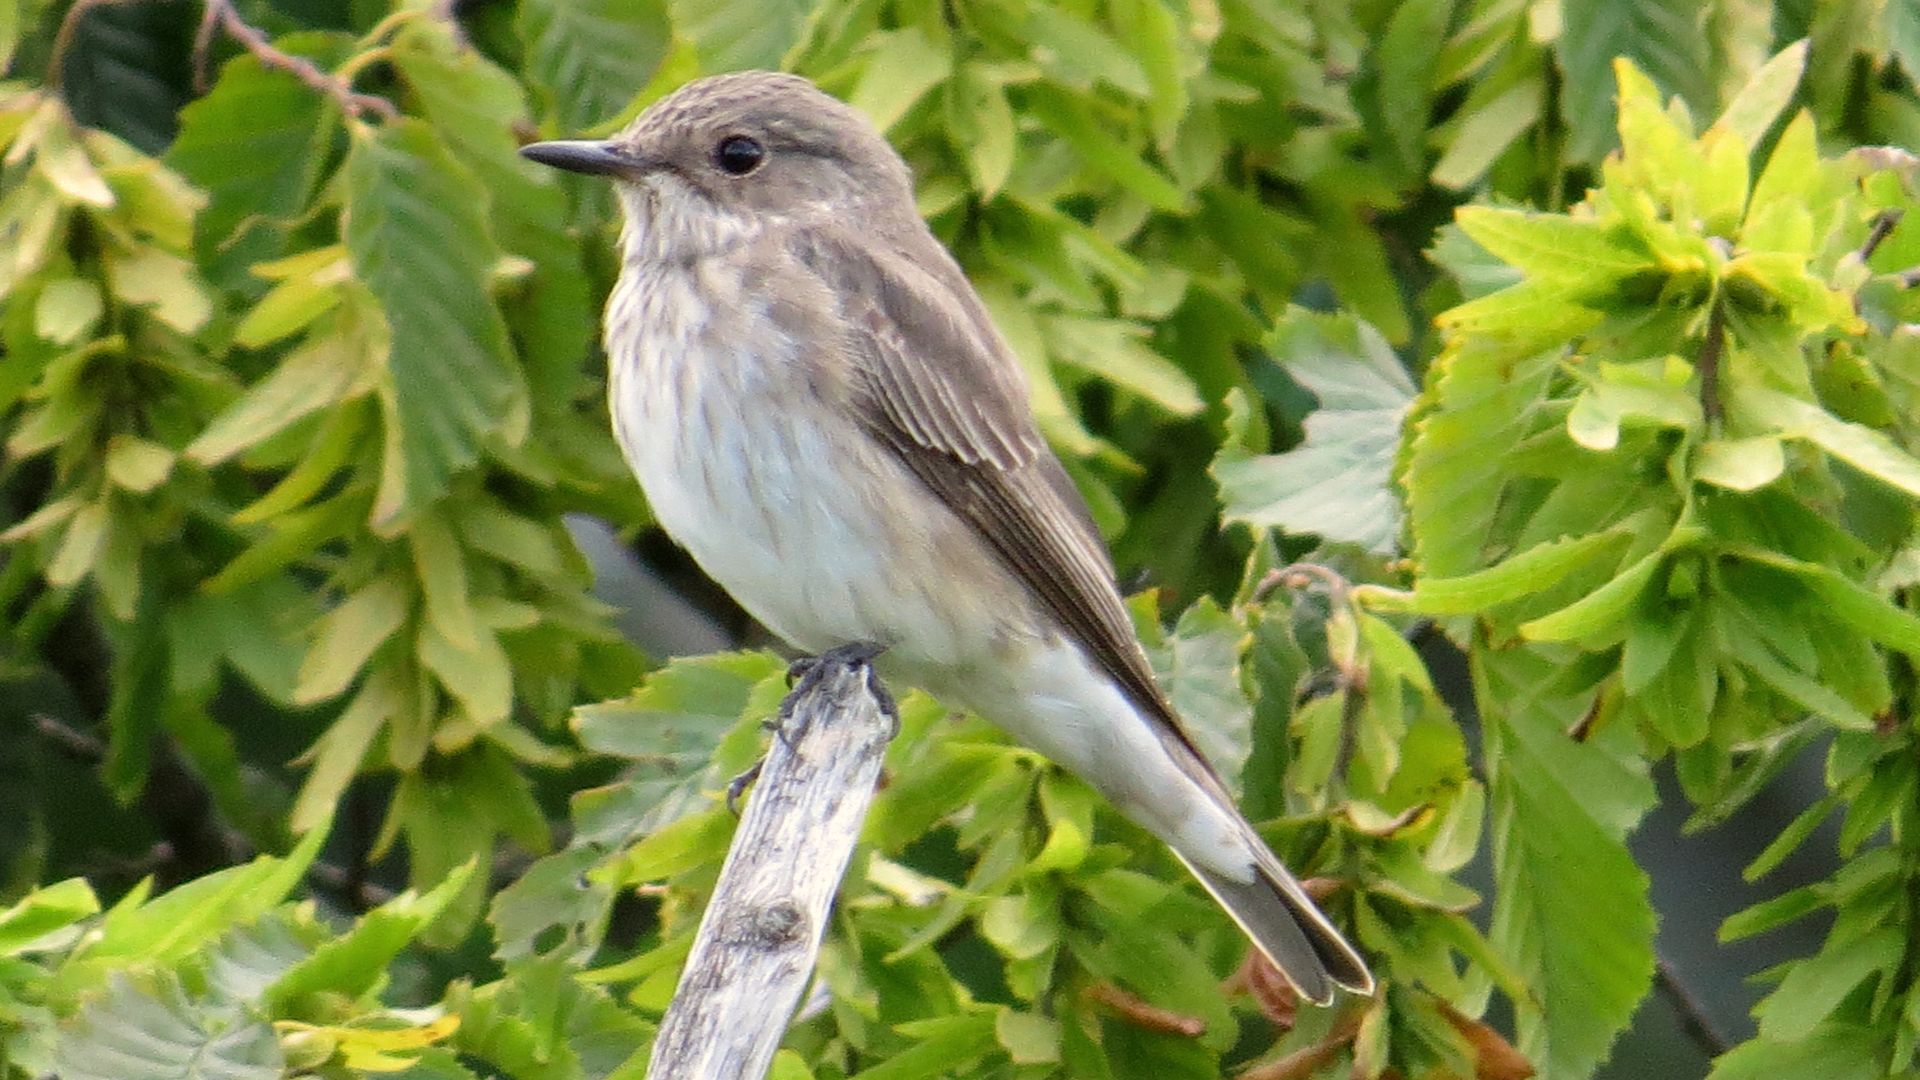 The spotted flycatcher has seen a precipitous decline in numbers. /MPF/Creative Commons